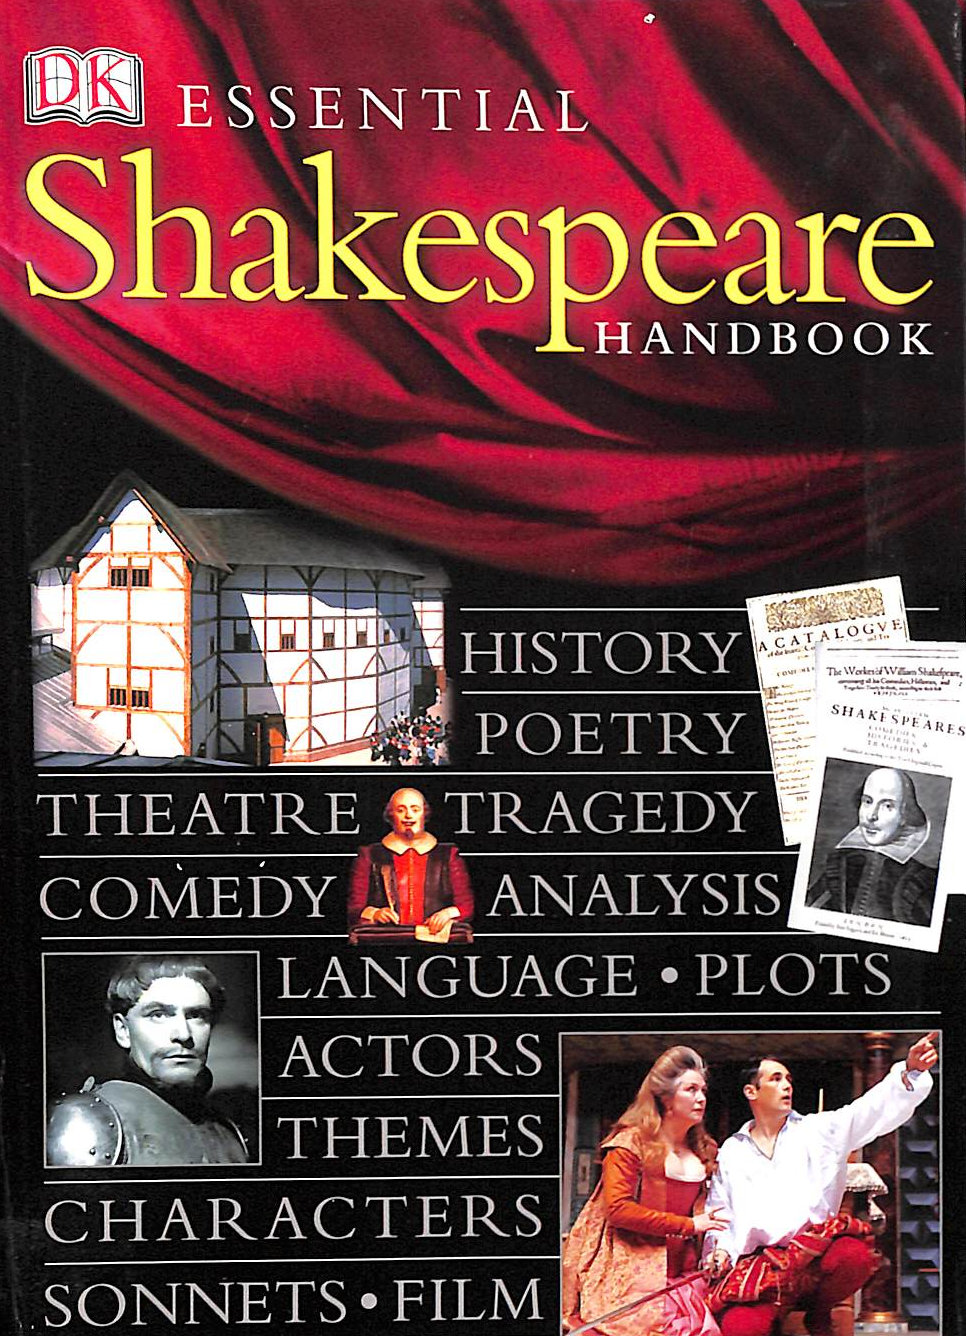 DUNTON-DOWNER, LESLIE; RIDING, ALAN - Essential Shakespeare Handbook: The Definitive, Fully Illustrated Guide to the World's Greatest Playwright and His Works